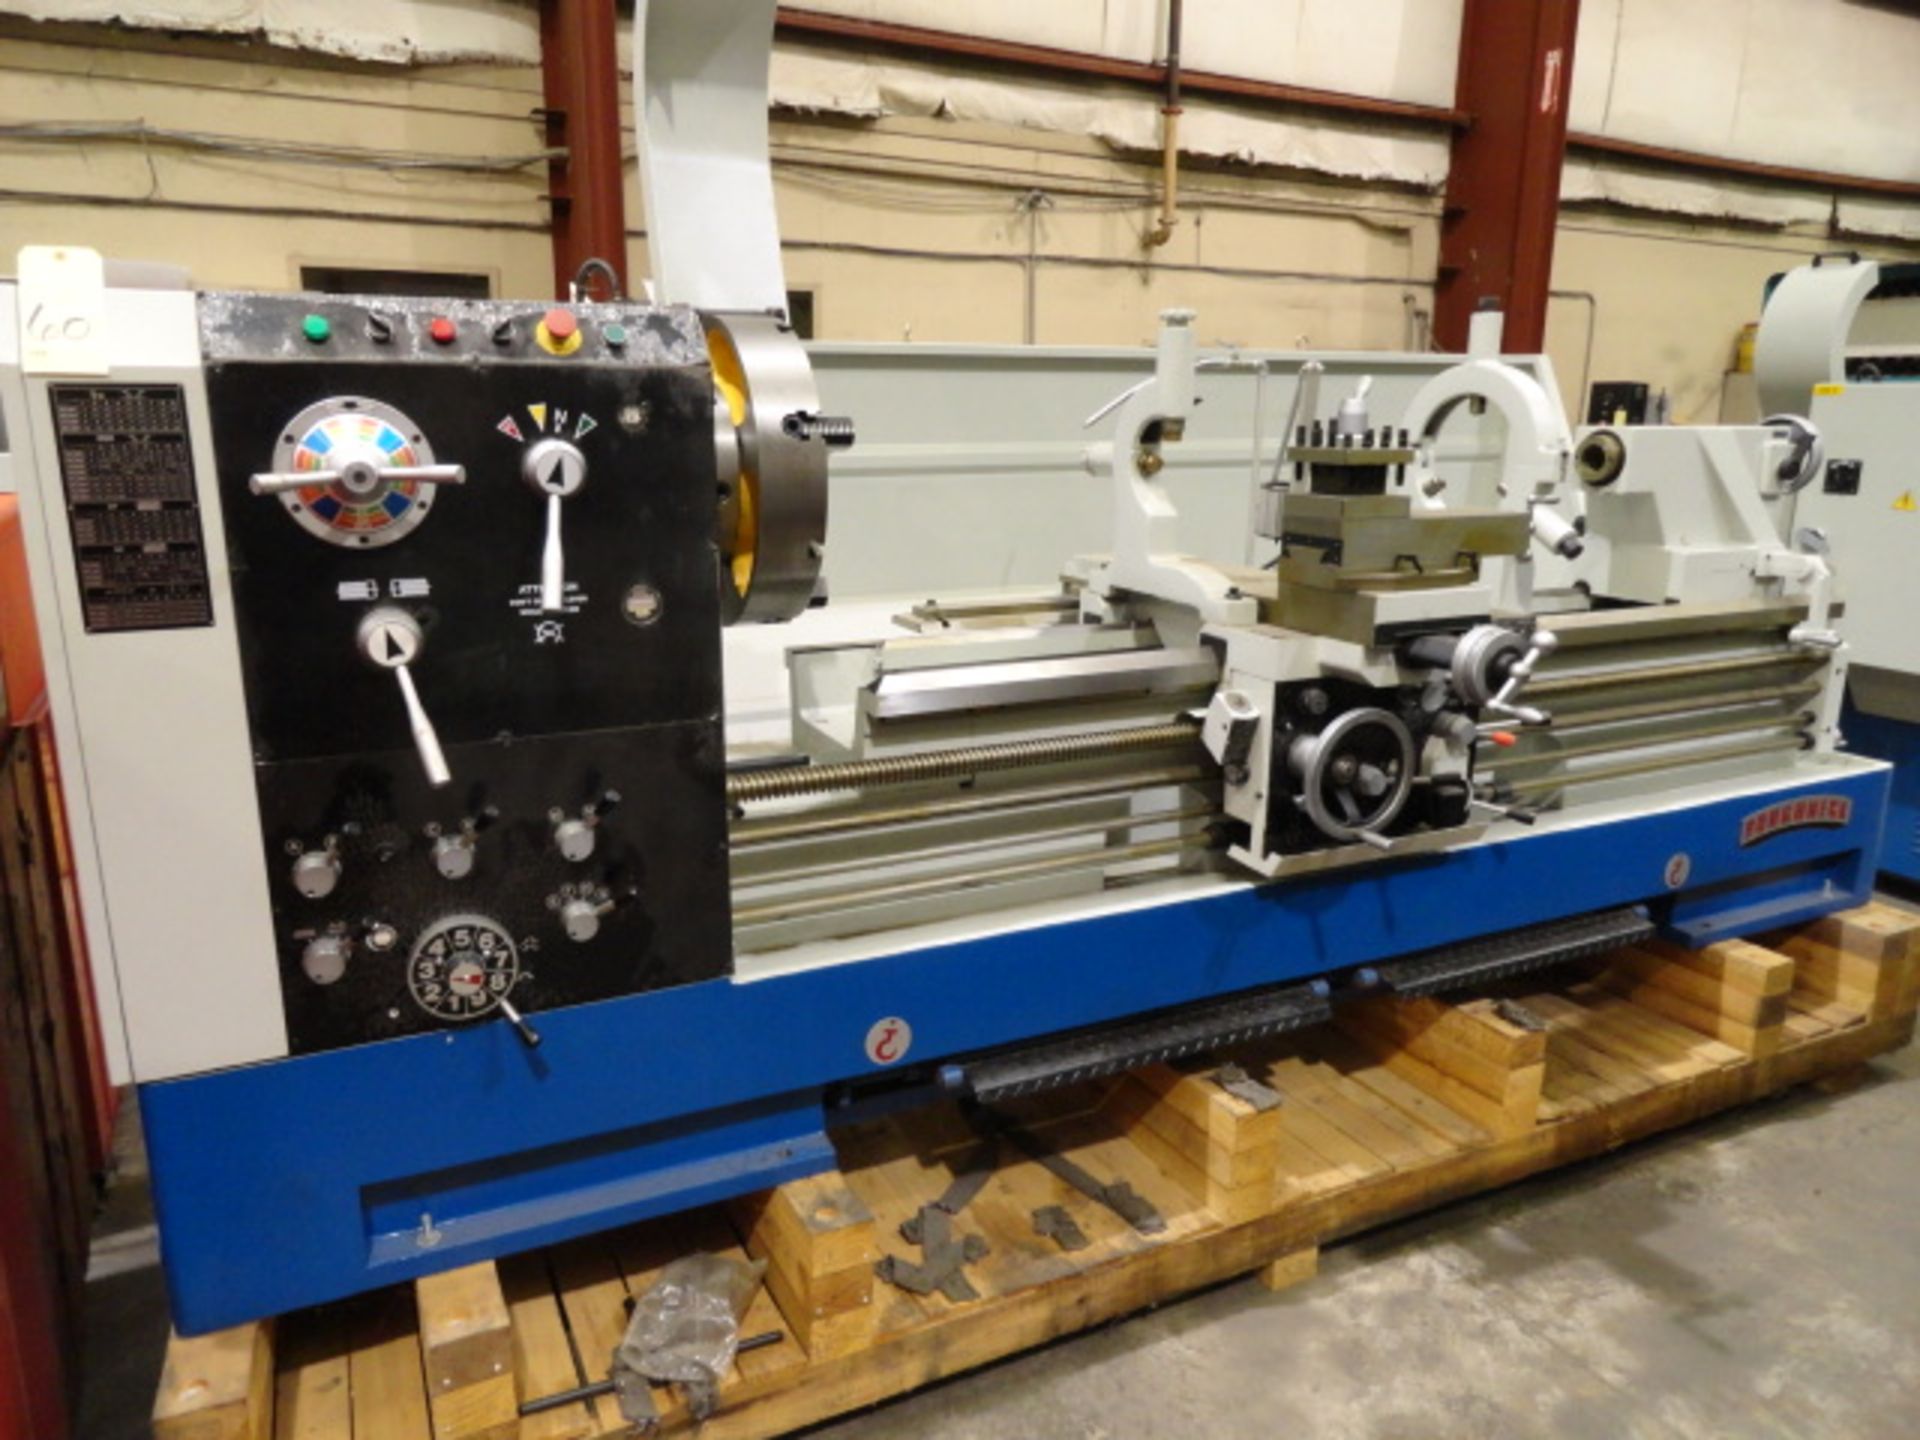 GAP BED ENGINE LATHE, ROUGHNECK 26" X 80" (CHU SHING) (NEW), 17-3/8” sw. over crosslide, 38-1/8” sw.